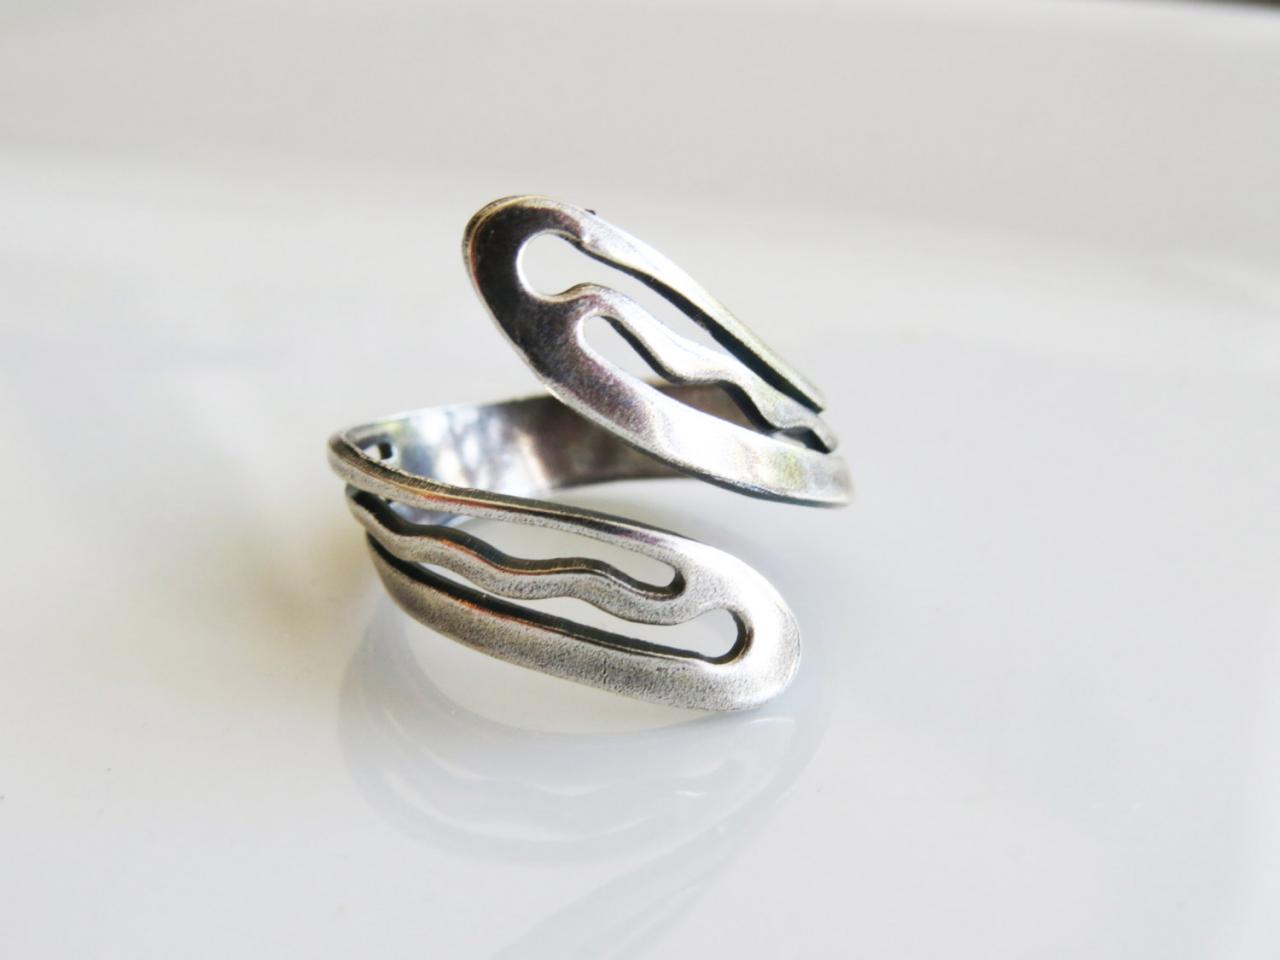 Silver Ring - Adjustable Ring, Wide Silver Ring, Statement Ring, Silver Accessories, Silver Jewelry